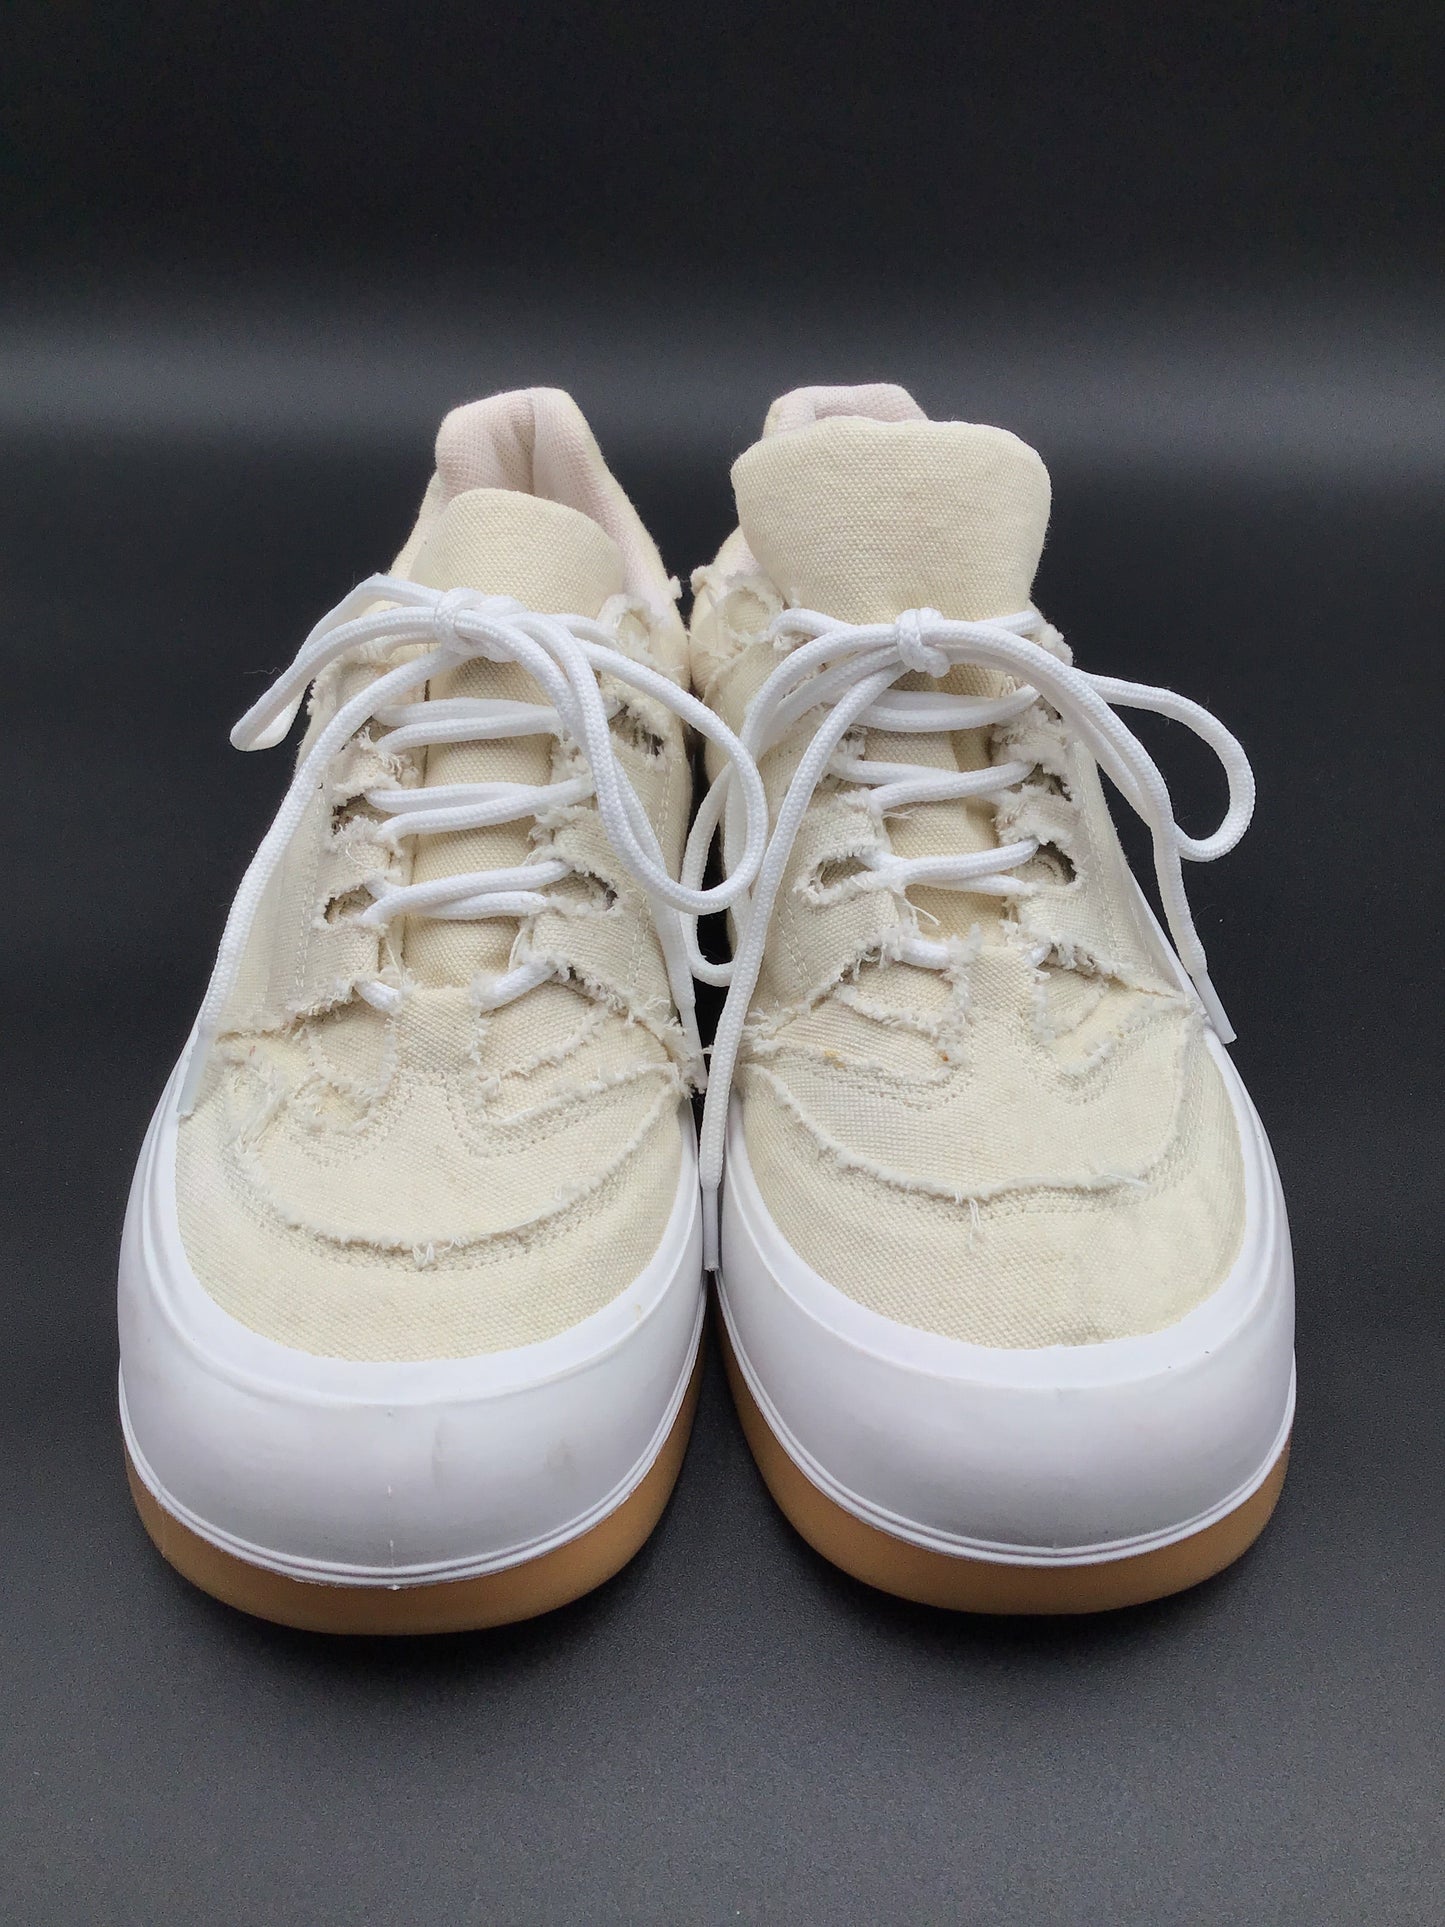 Shoes Sneakers By Urban Outfitters  Size: 10